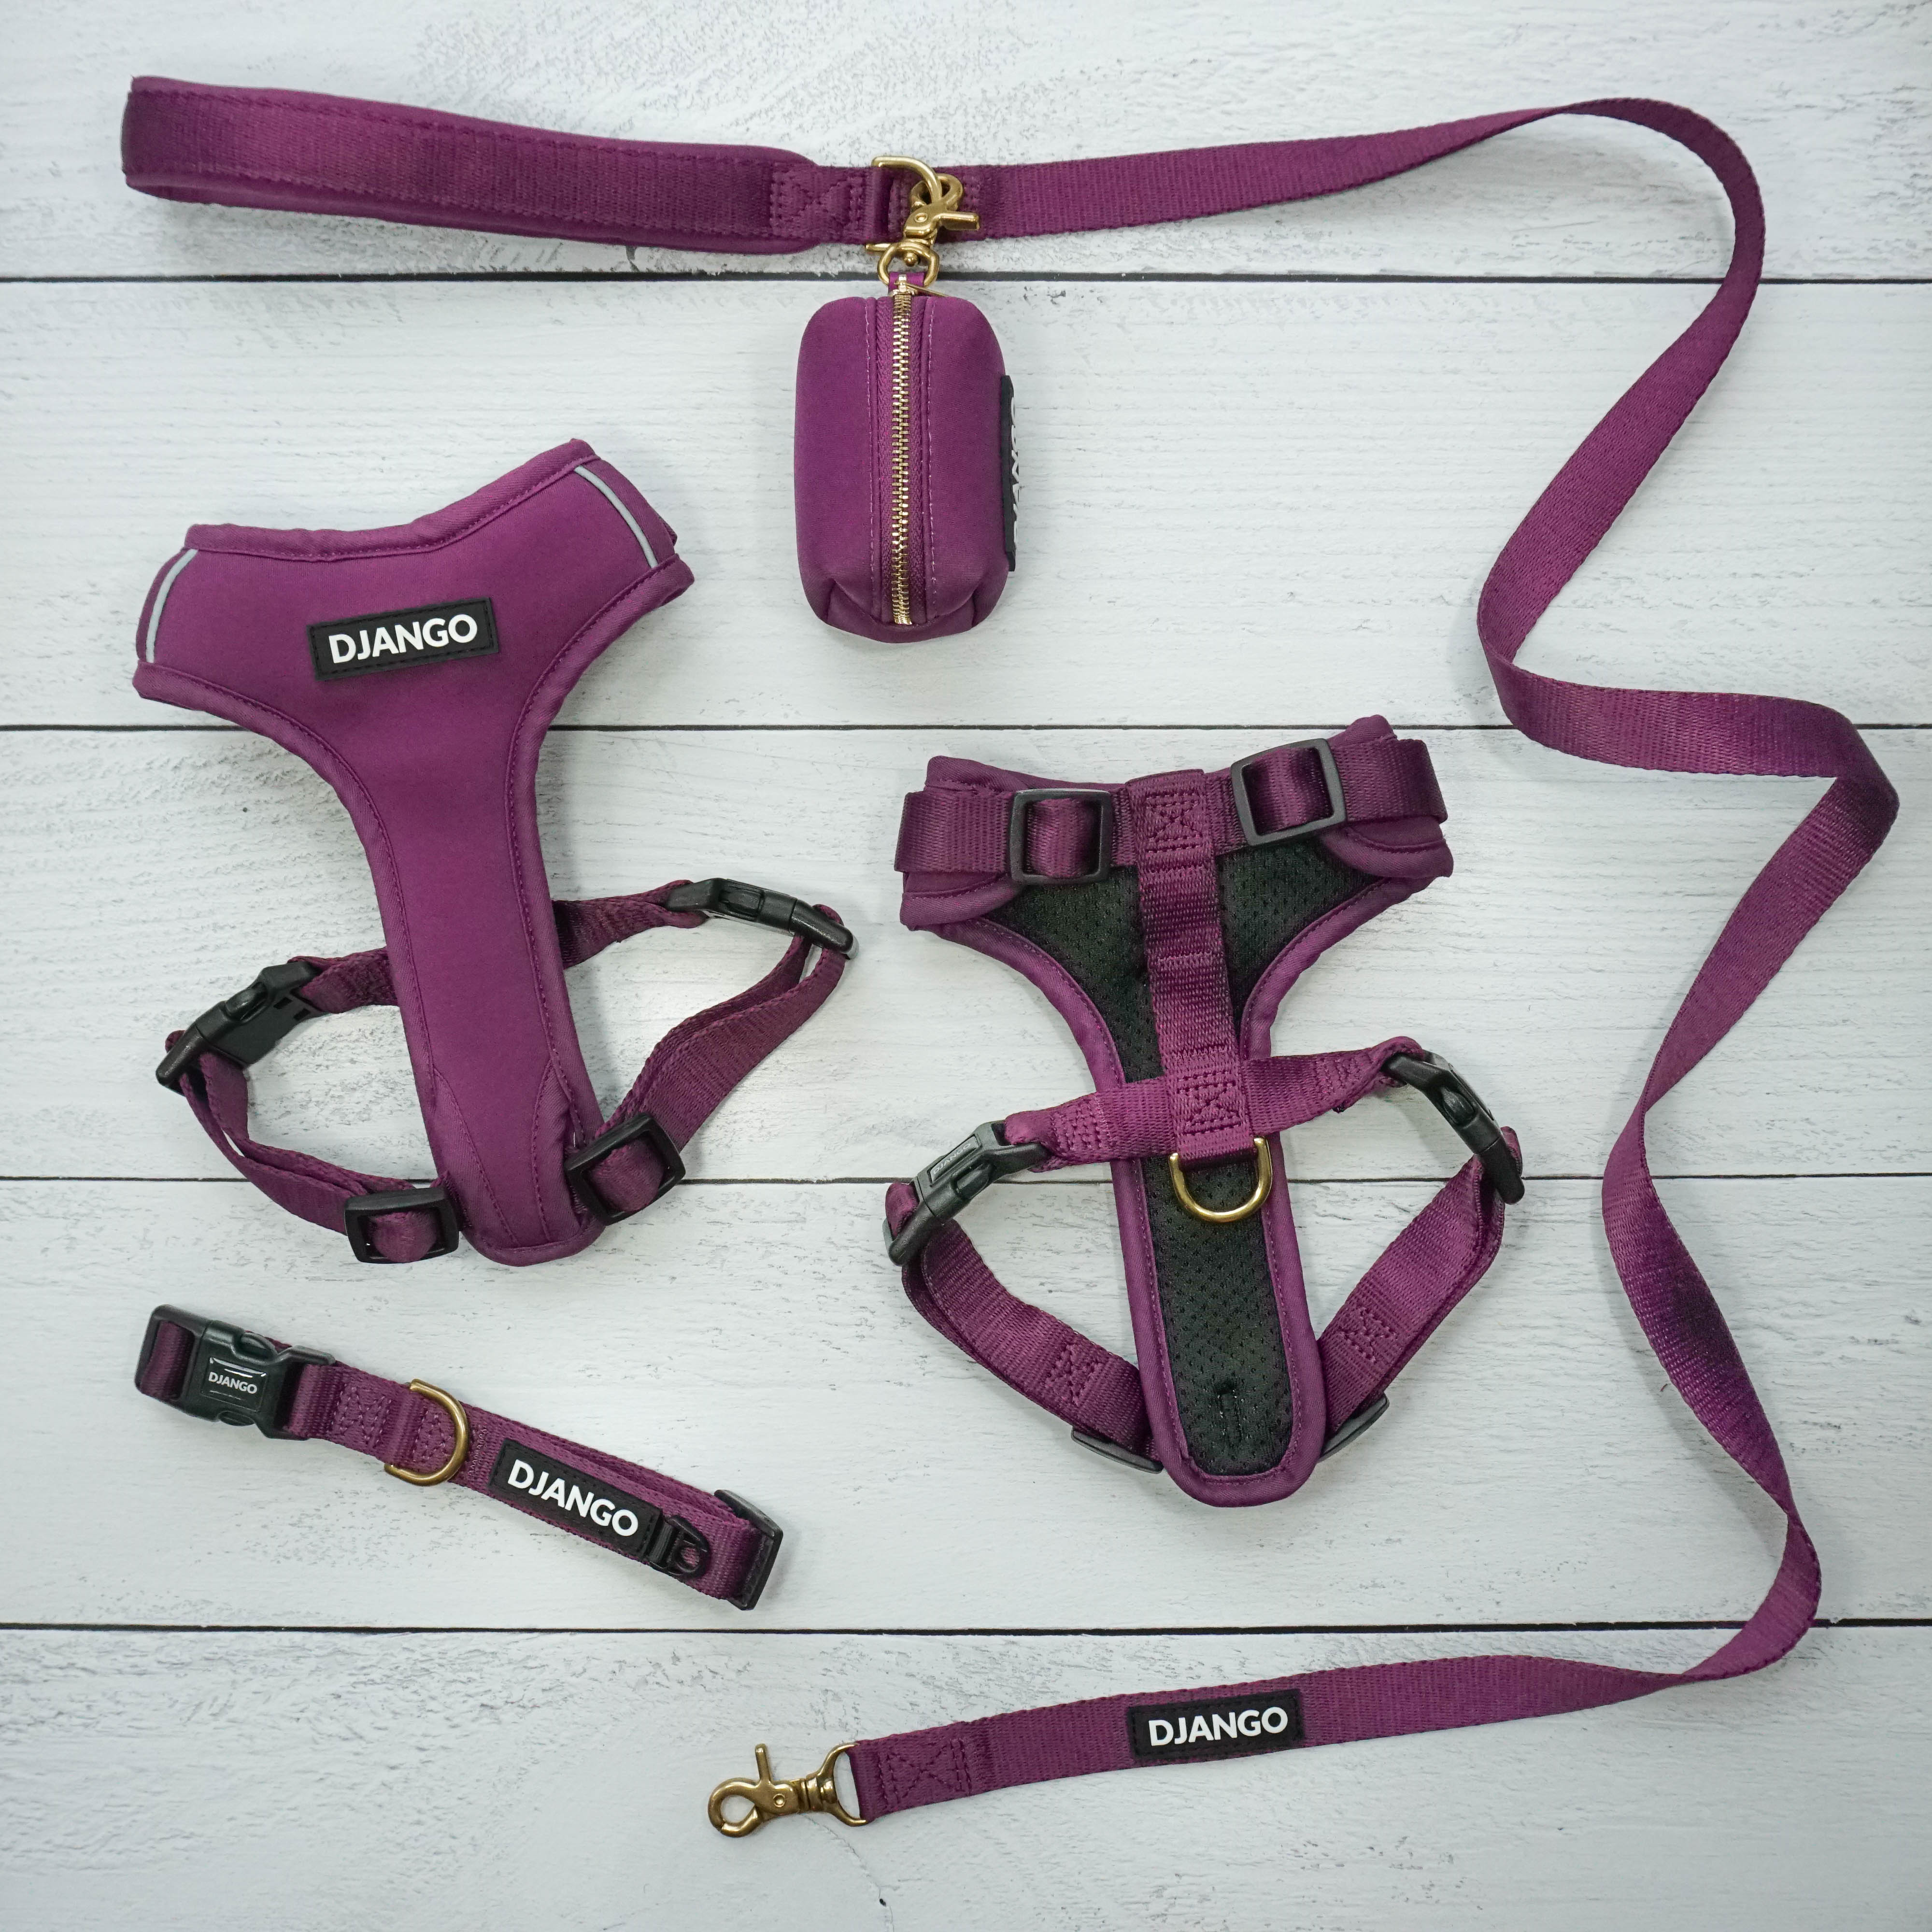 DJANGO Adventure Bundle in Plum Purple - The Adventure Bundle includes our comfortable, durable, and weather-resistant Adventure Dog Harness, Adventure Dog Collar, Standard Adventure Dog Leash, and chic Waste Bag Holder. All items feature high-strength and corrosion-resistant solid brass hardware. Save $$$ when you complete your set and order the Adventure Bundle - djangobrand.com